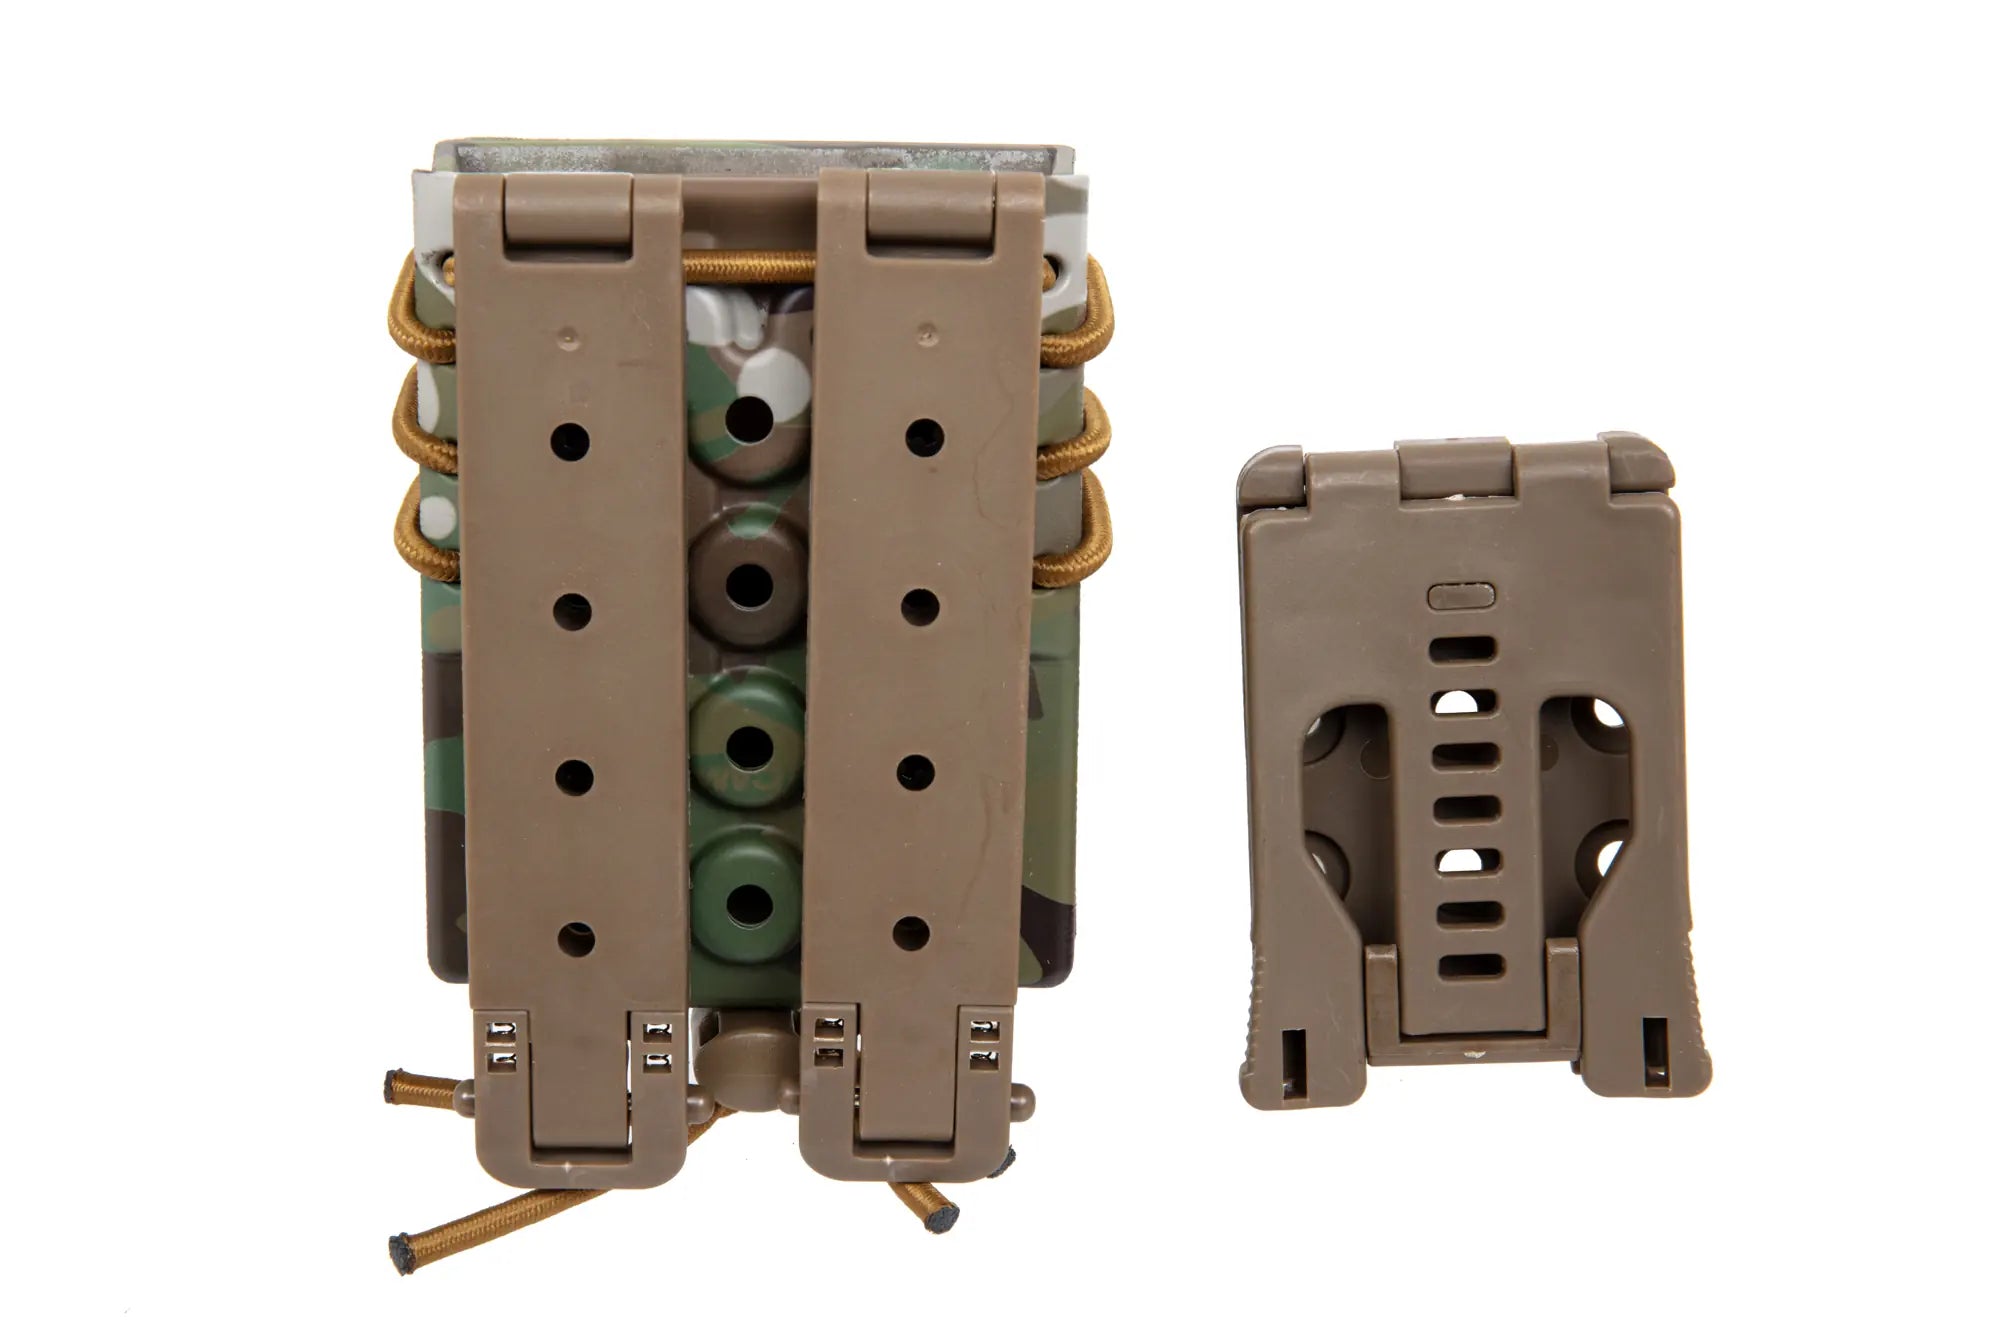 Carrier for 2 M4/M16 and 9mm magazines Wosport Urban Assault Quick Pull Multicam-1